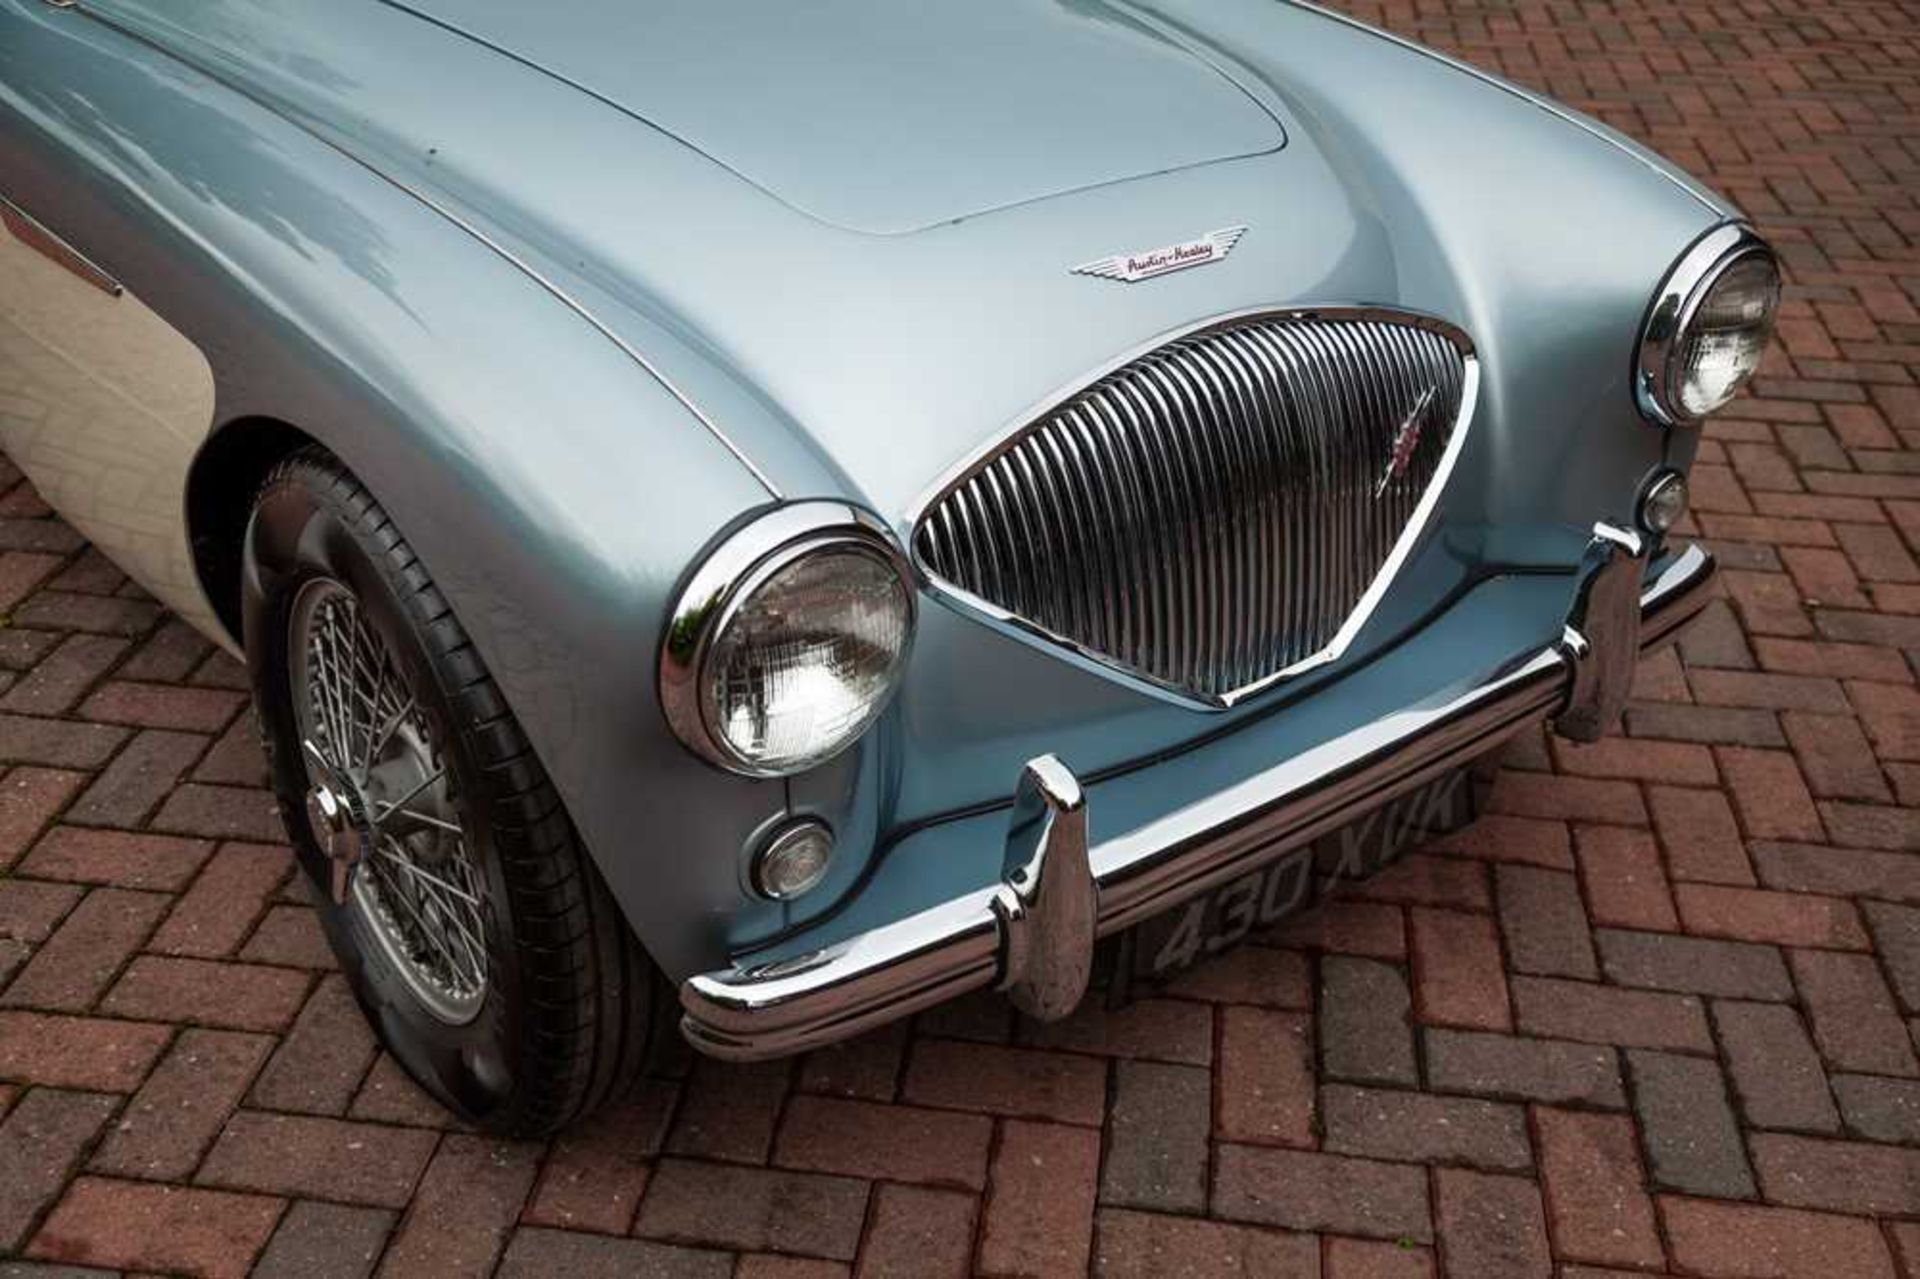 1955 Austin-Healey 100/4 Subtly Upgraded with 5-Speed Transmission and Front Disc Brakes - Image 15 of 54